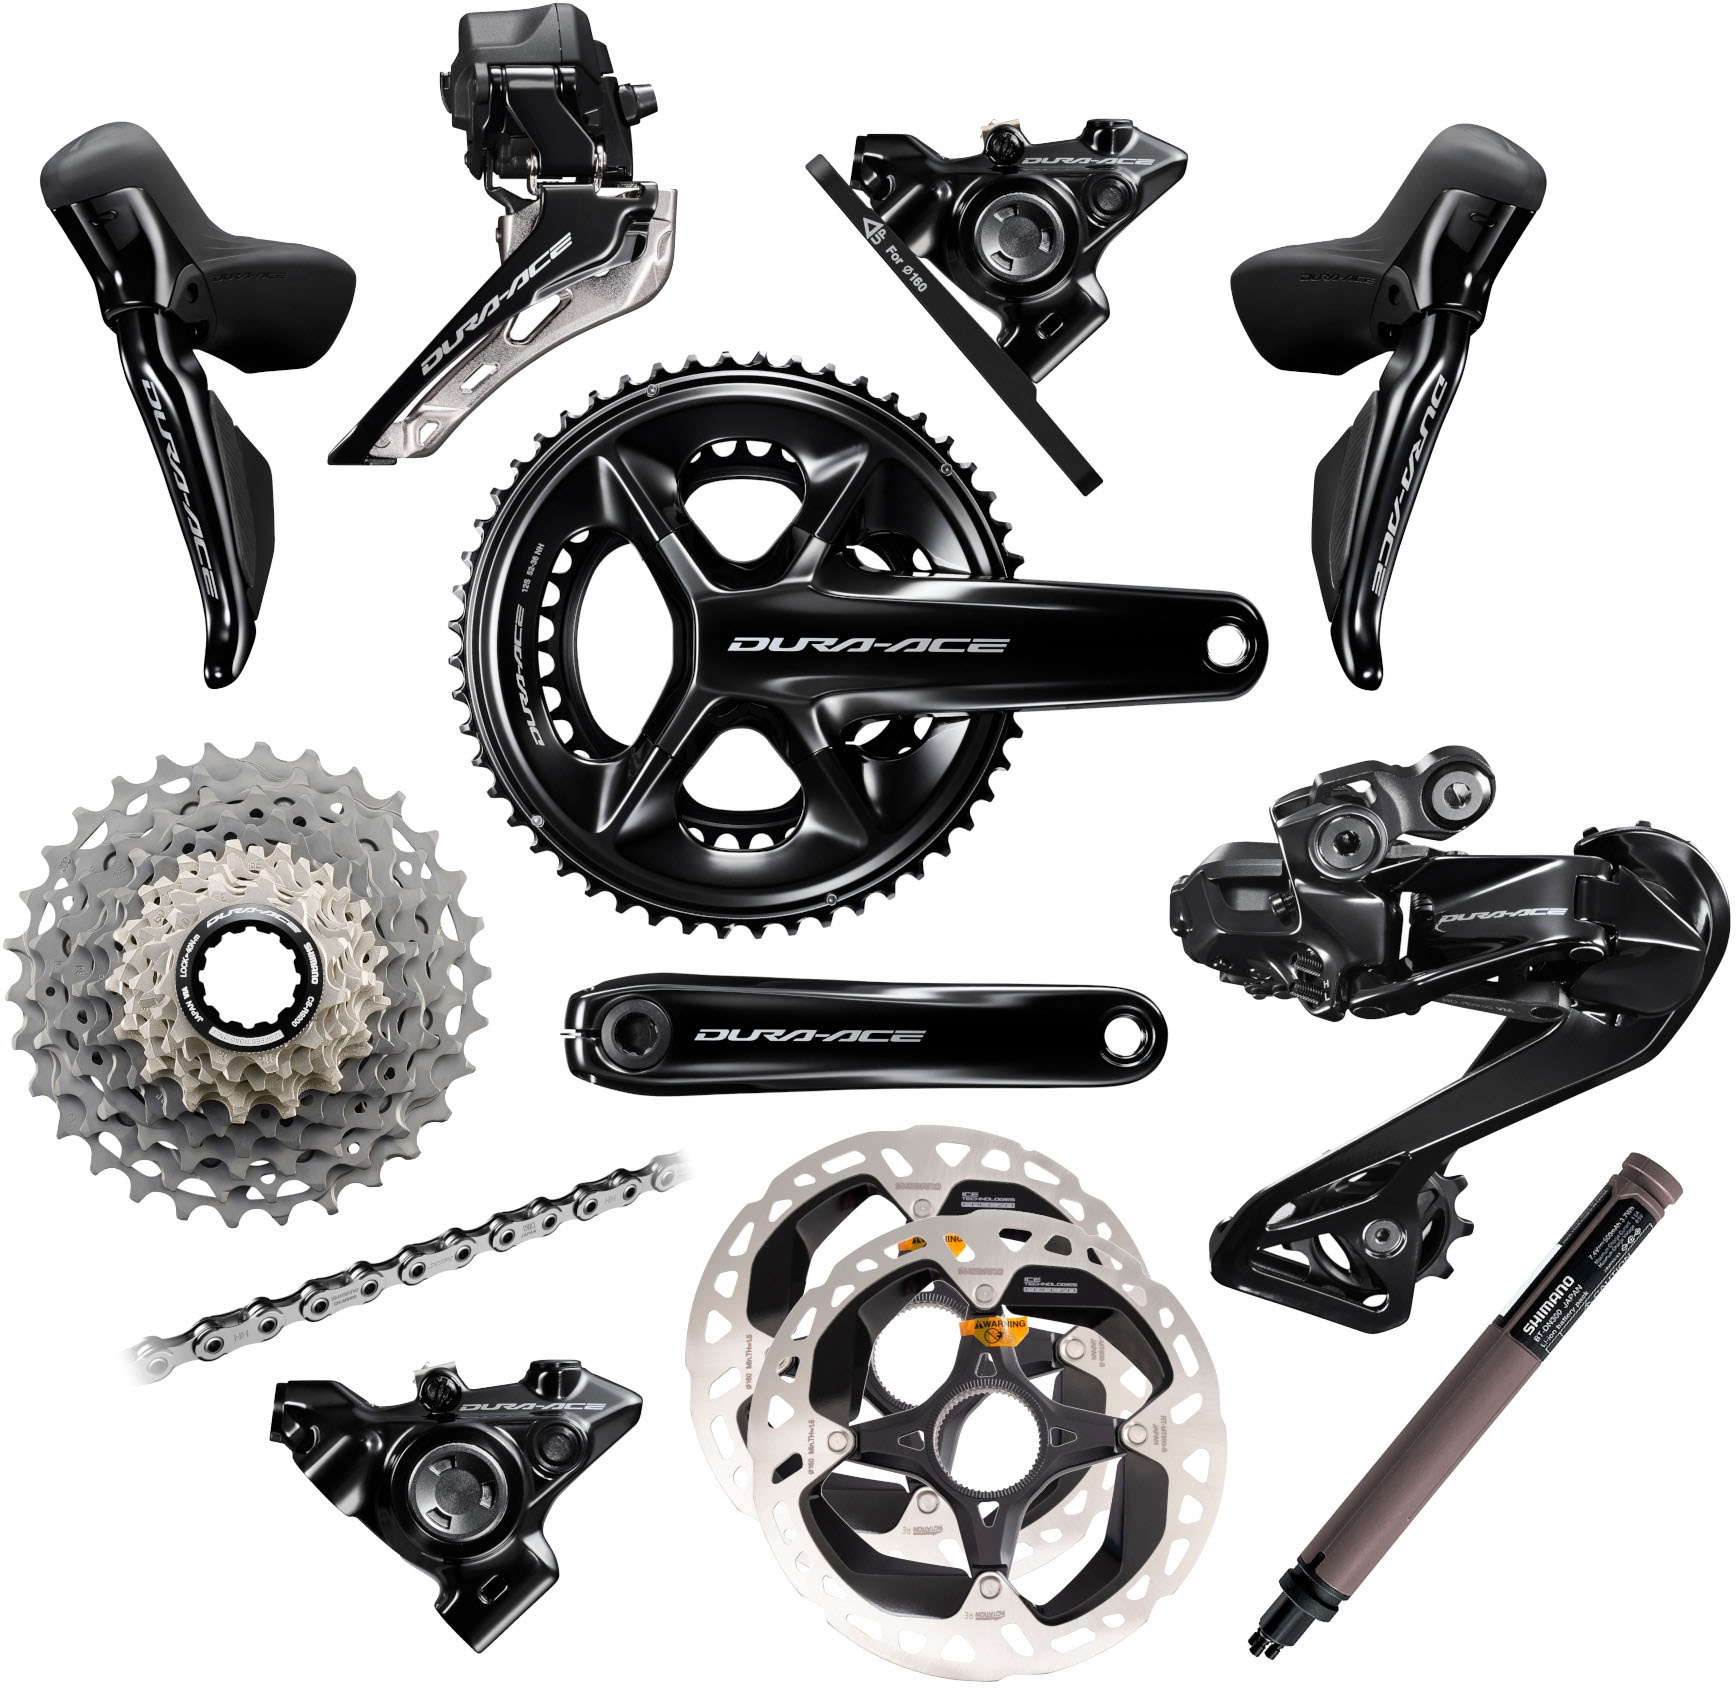 Reservedele - Geargrupper - Shimano Dura-Ace R9200 Introdction Box R9250 - Komplet Geargruppe 2x12